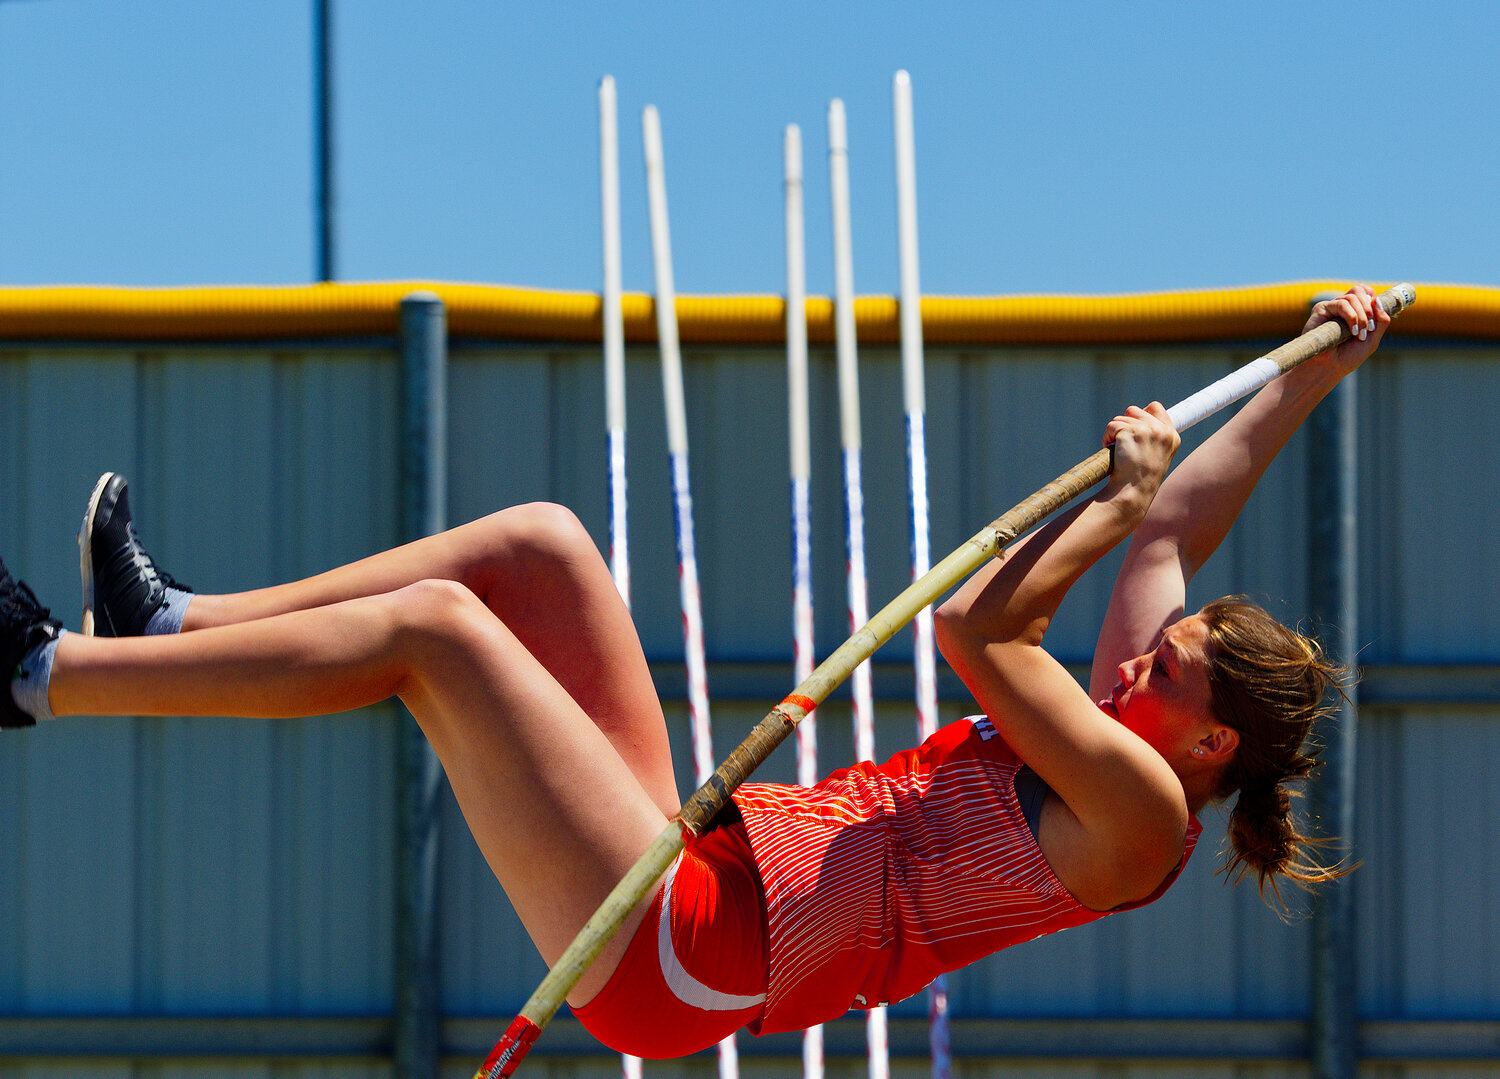 Mineola pole-vaulter Milo Reed cleared 8'6" to earn fourth place. [see more speed and strength on display]